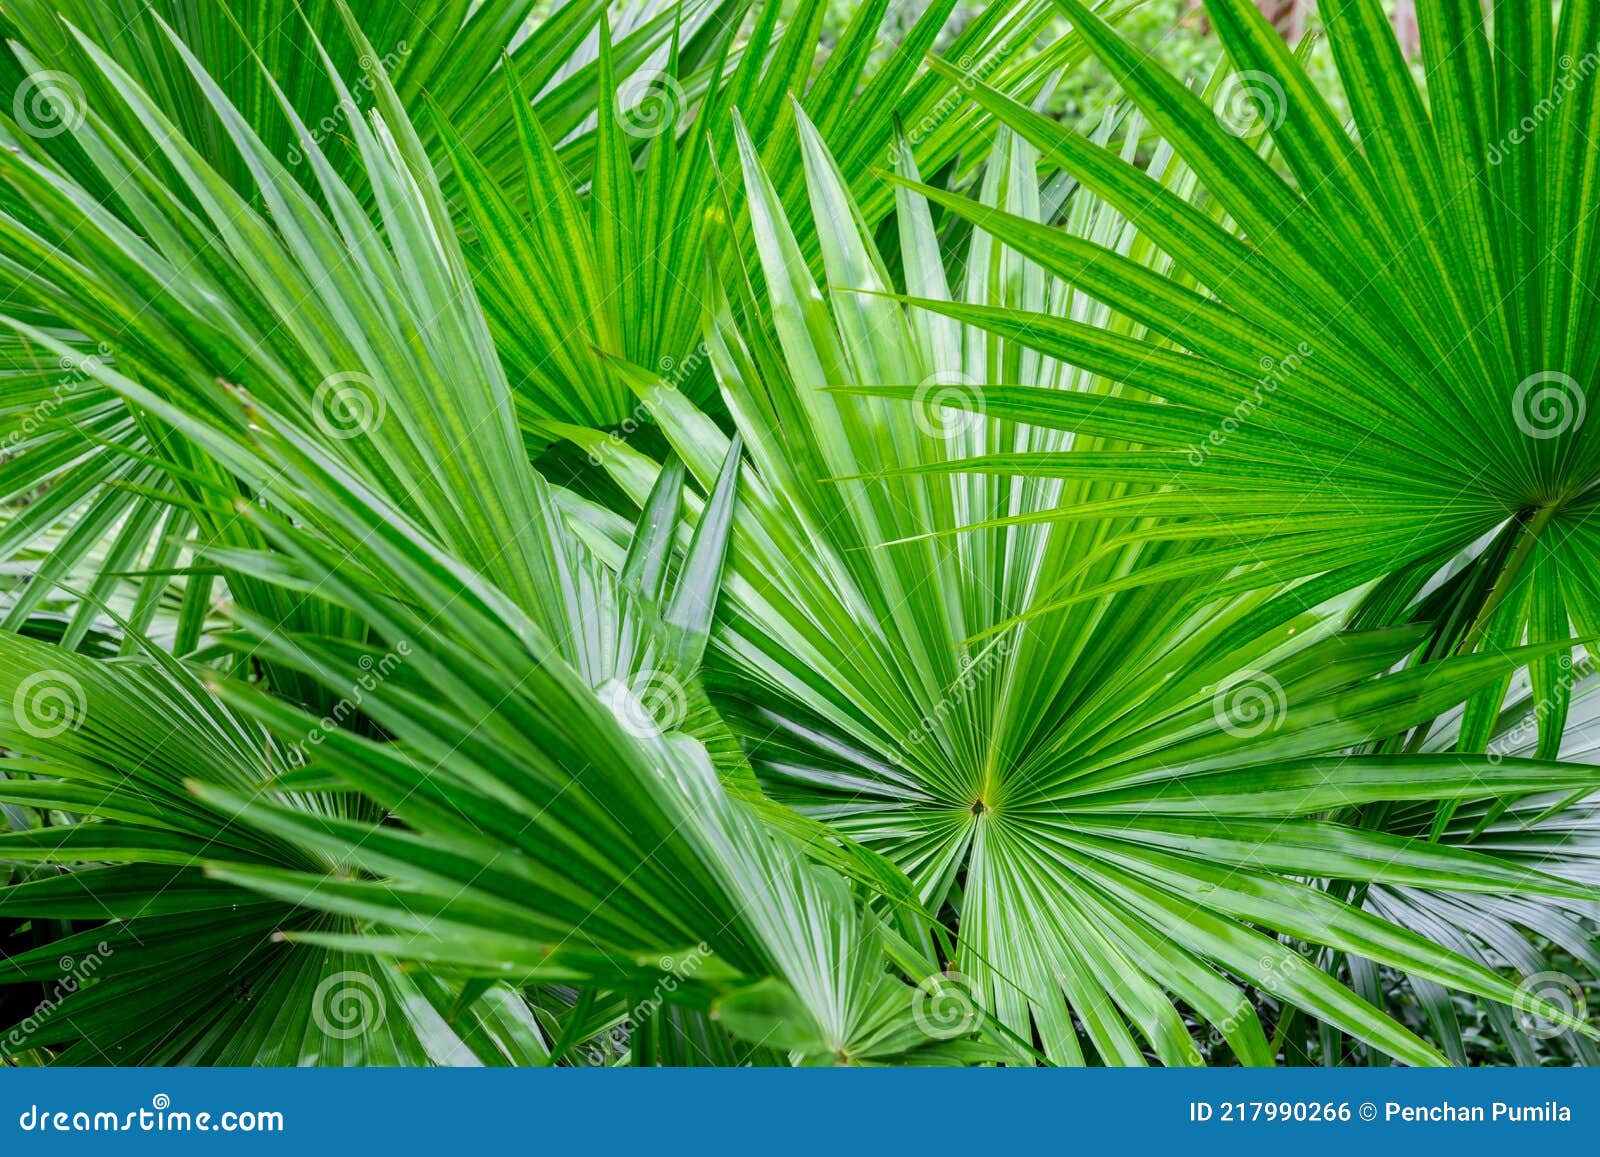 Abstract of Tropical Palm Foliage Stock Photo - Image of fresh